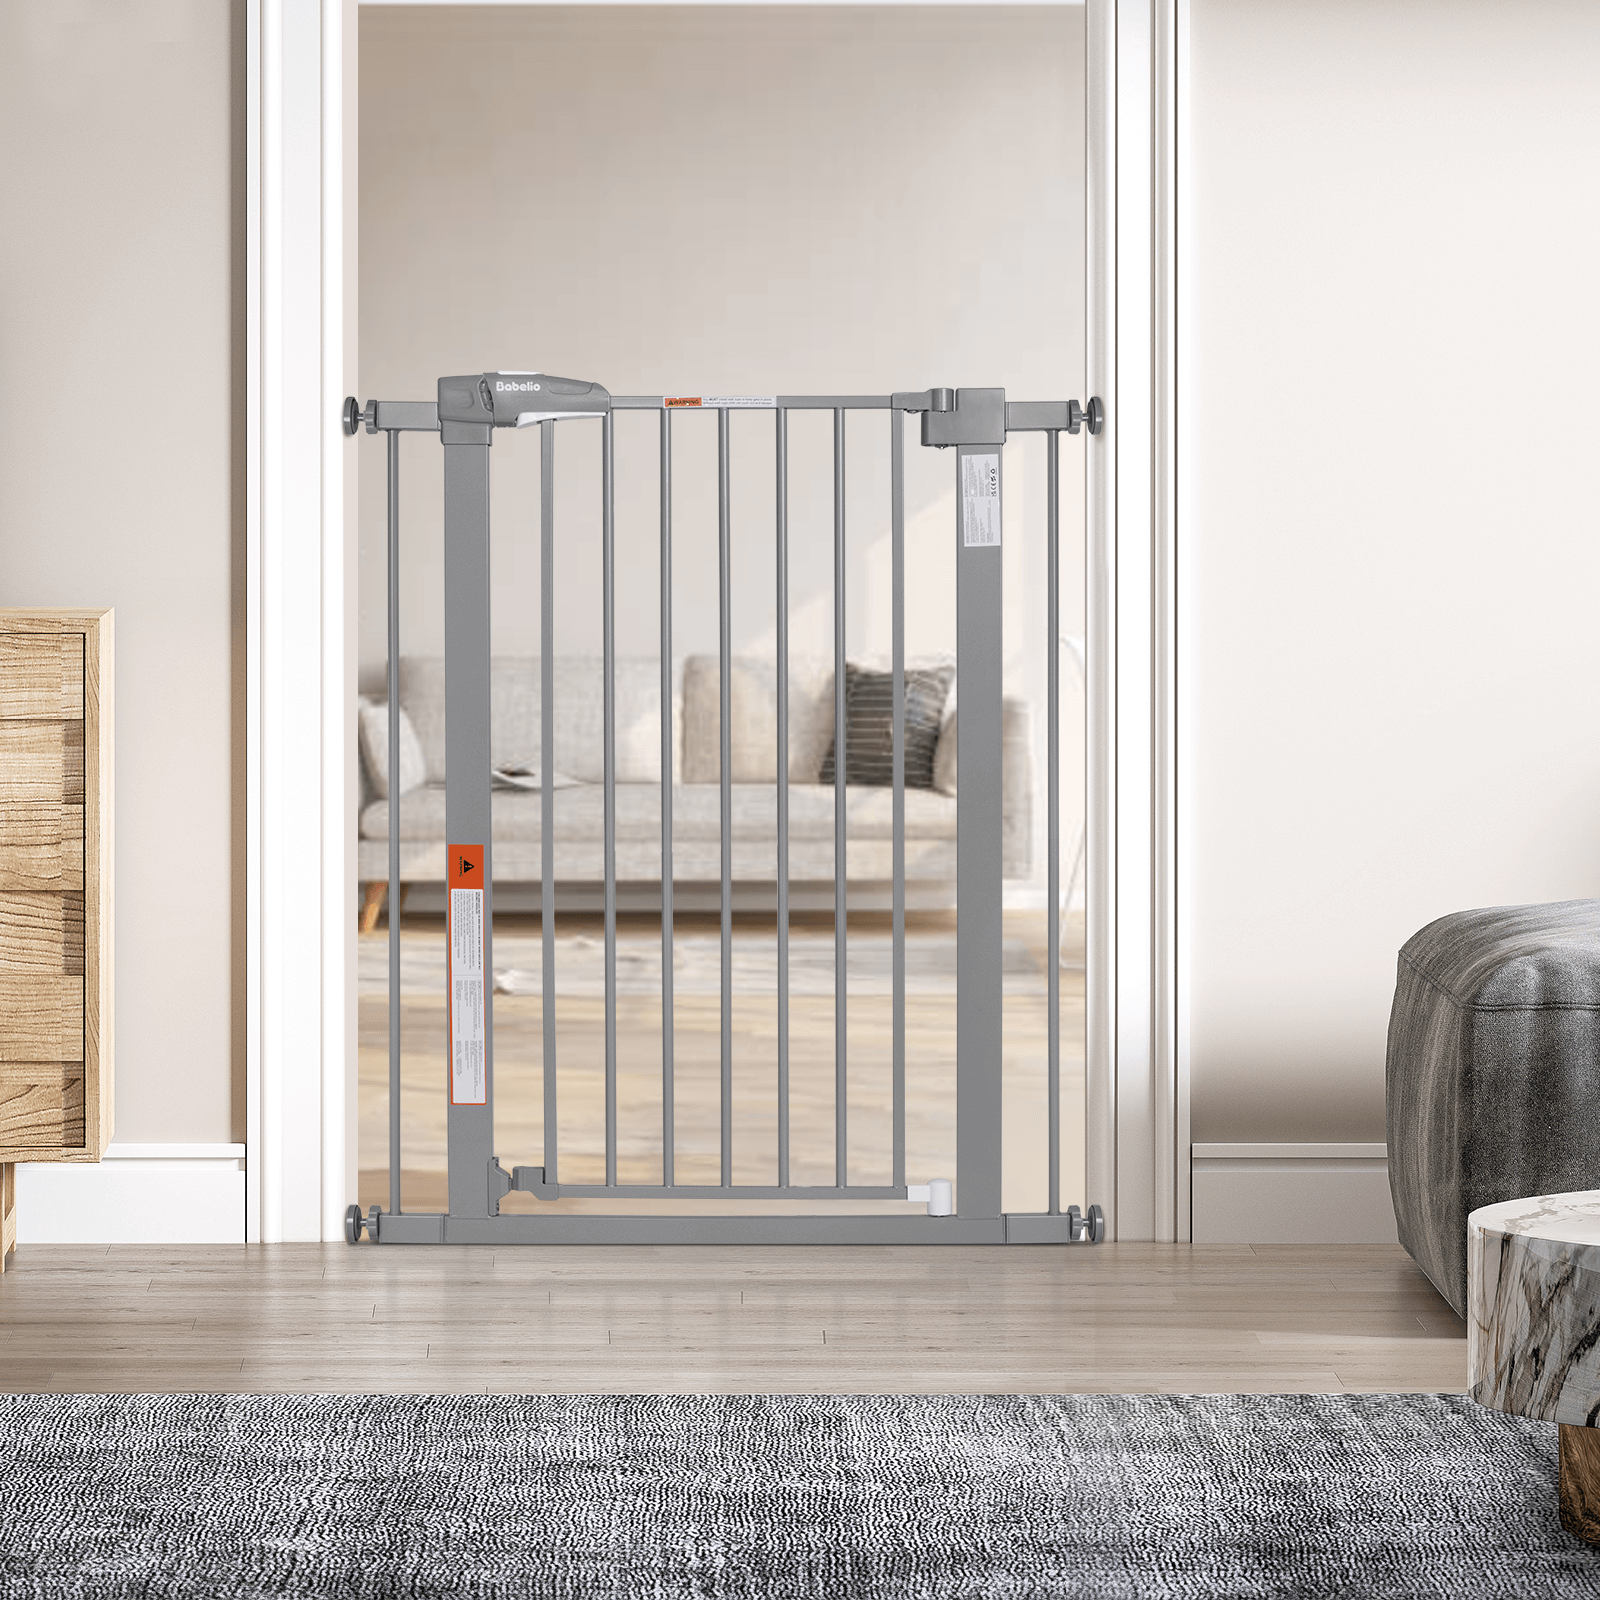 Babelio 36" High Adjustable Metal Gate for Babies & Pets – Easy Install, 26-40" Wide, Auto-Close, Gray